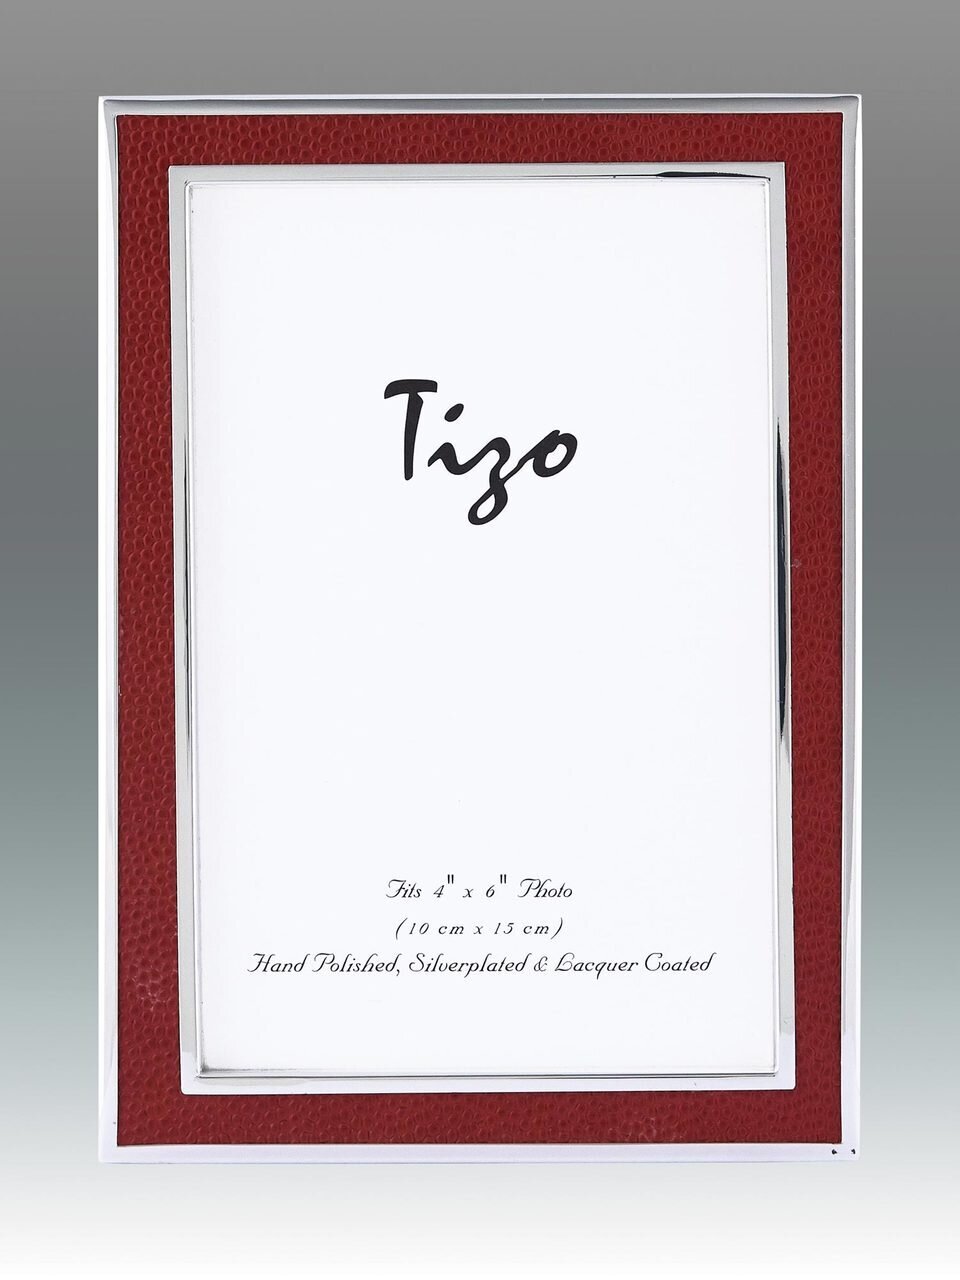 Tizo Shagreen Red & Silver-plated Picture Frame 5 x 7 Inch